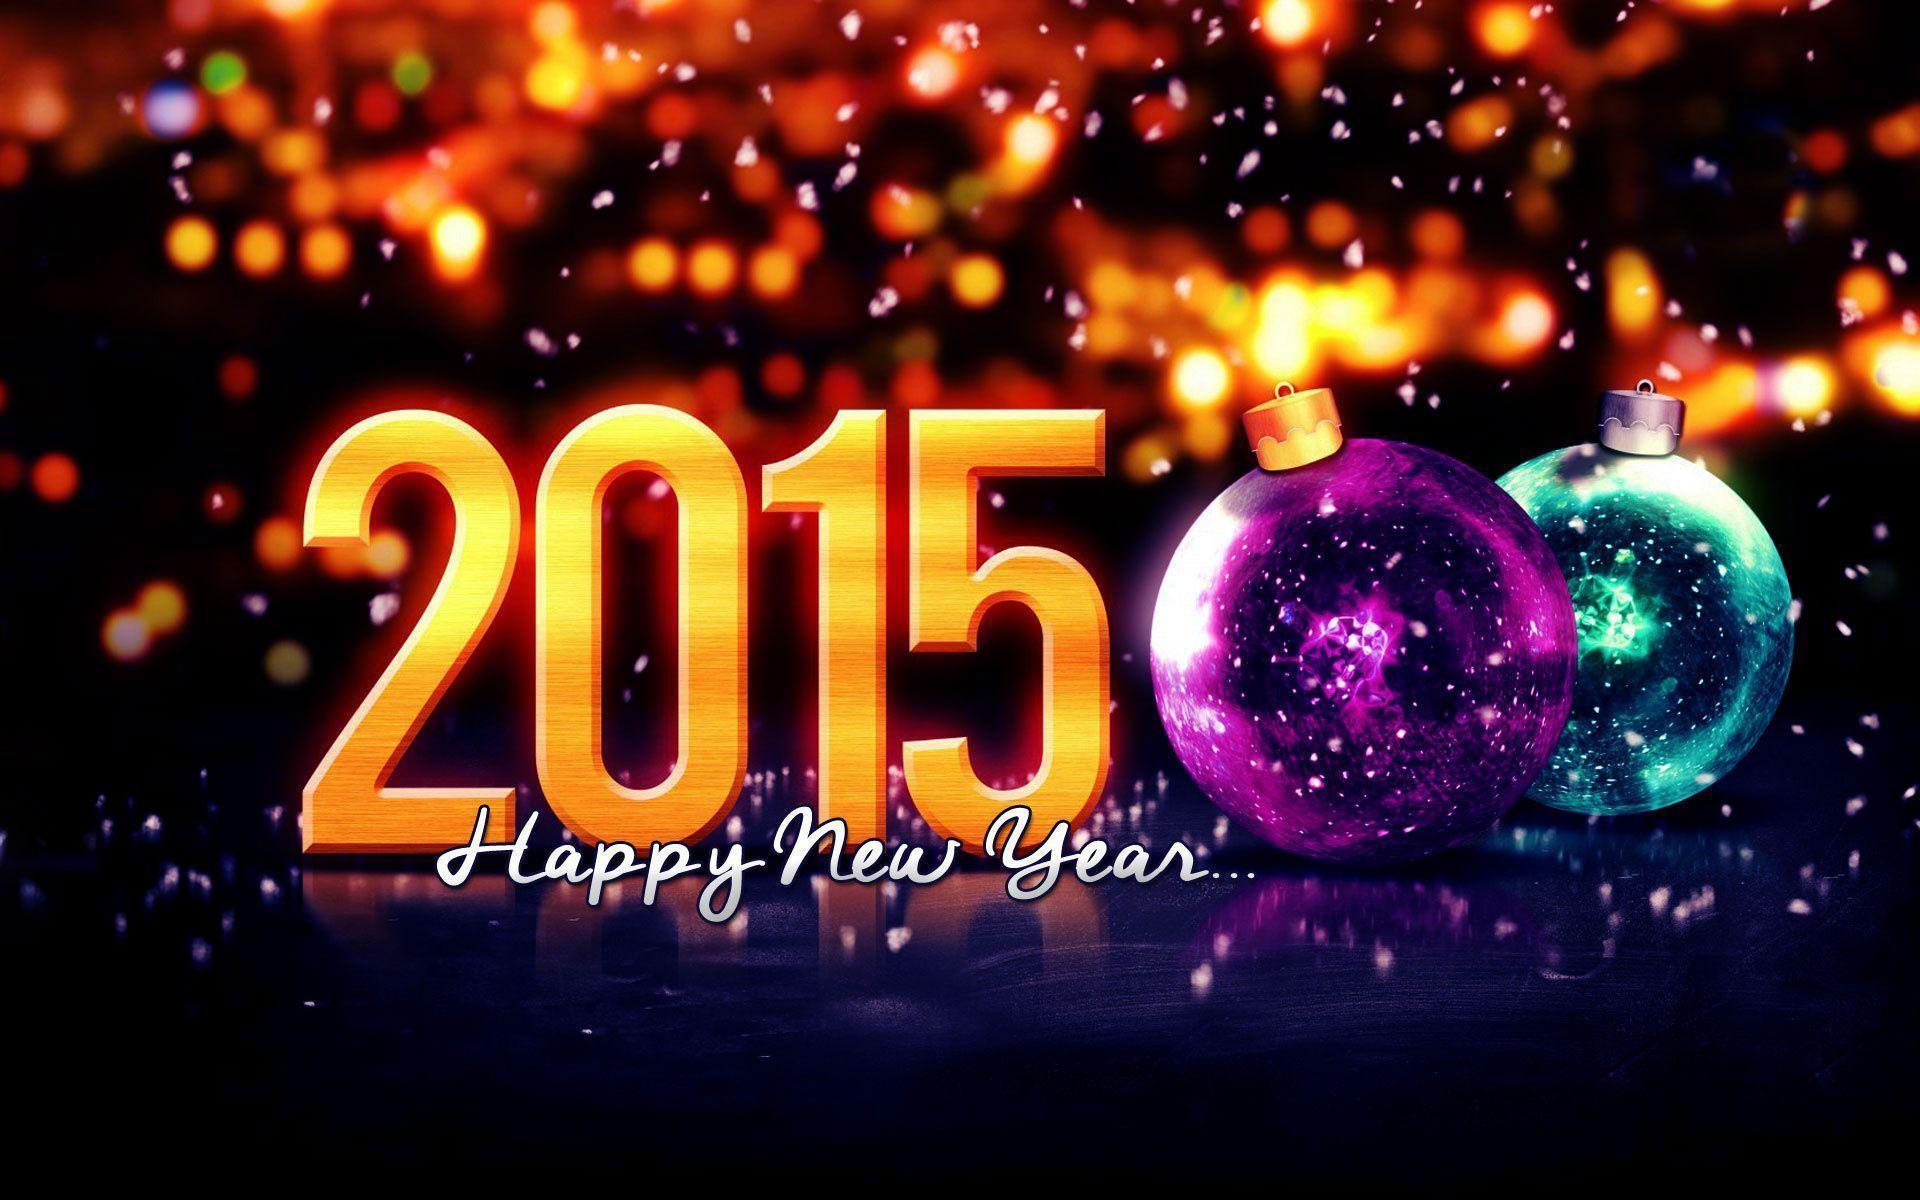 Happy New Year 2015 Bulbs Bokeh Wallpaper Wide or HD. Holidays